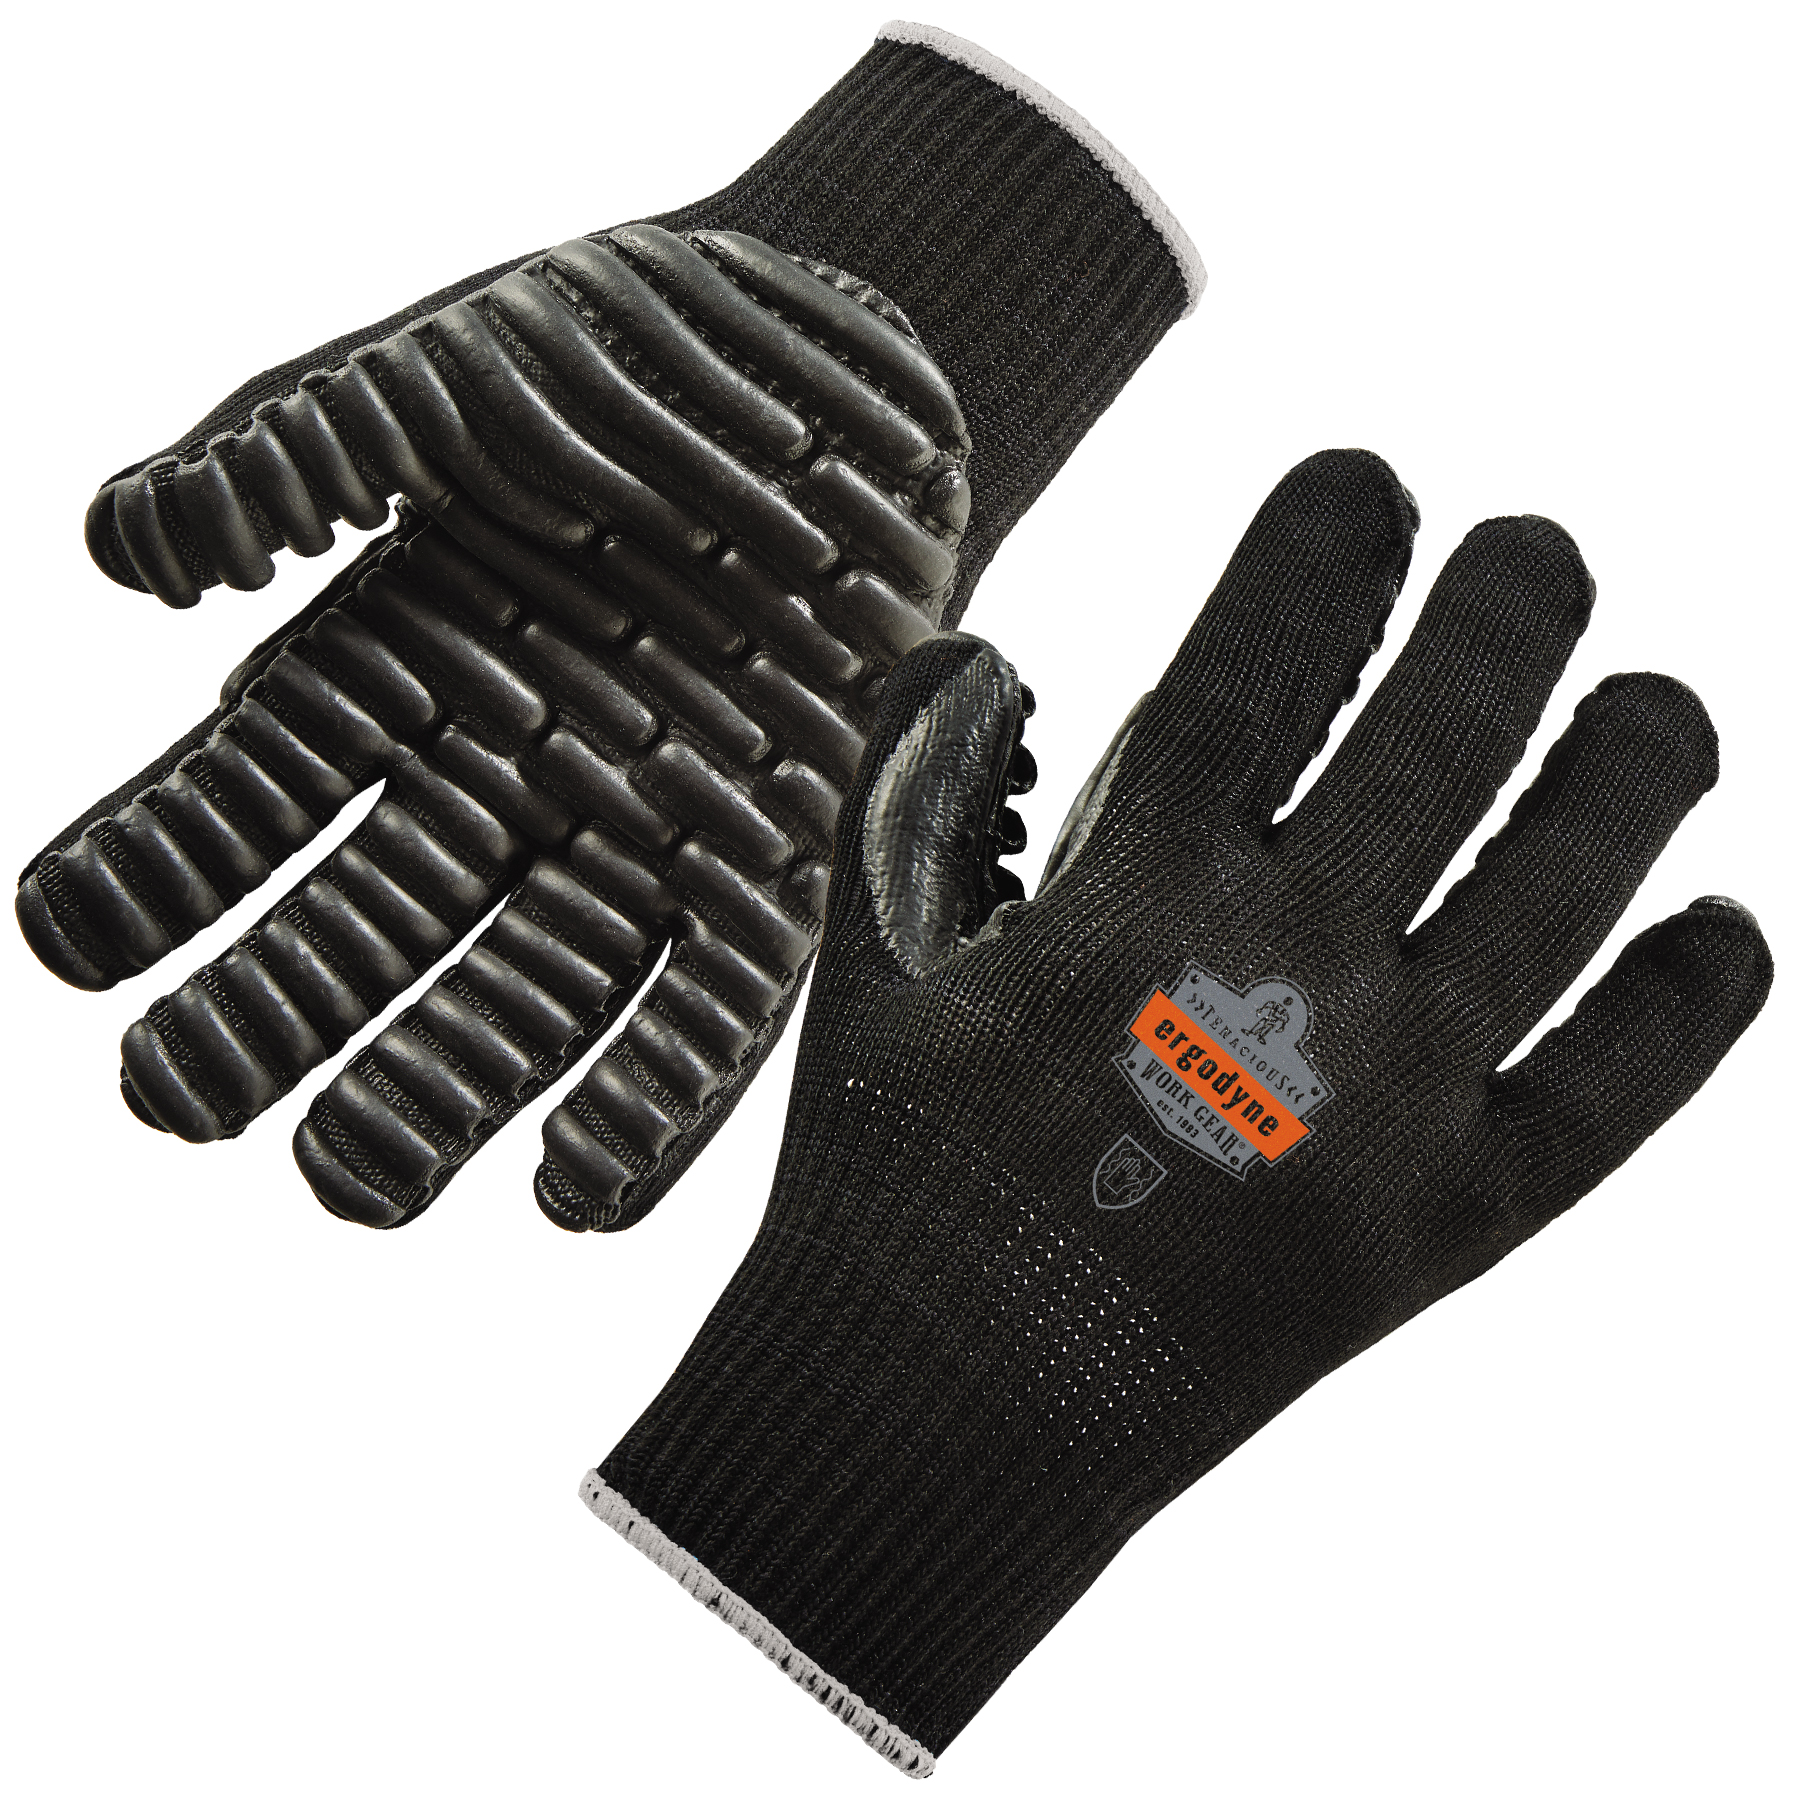 Anti Vibration Gloves Leather Gripped Padded Palm Reduce Vibrate Full Fingers 